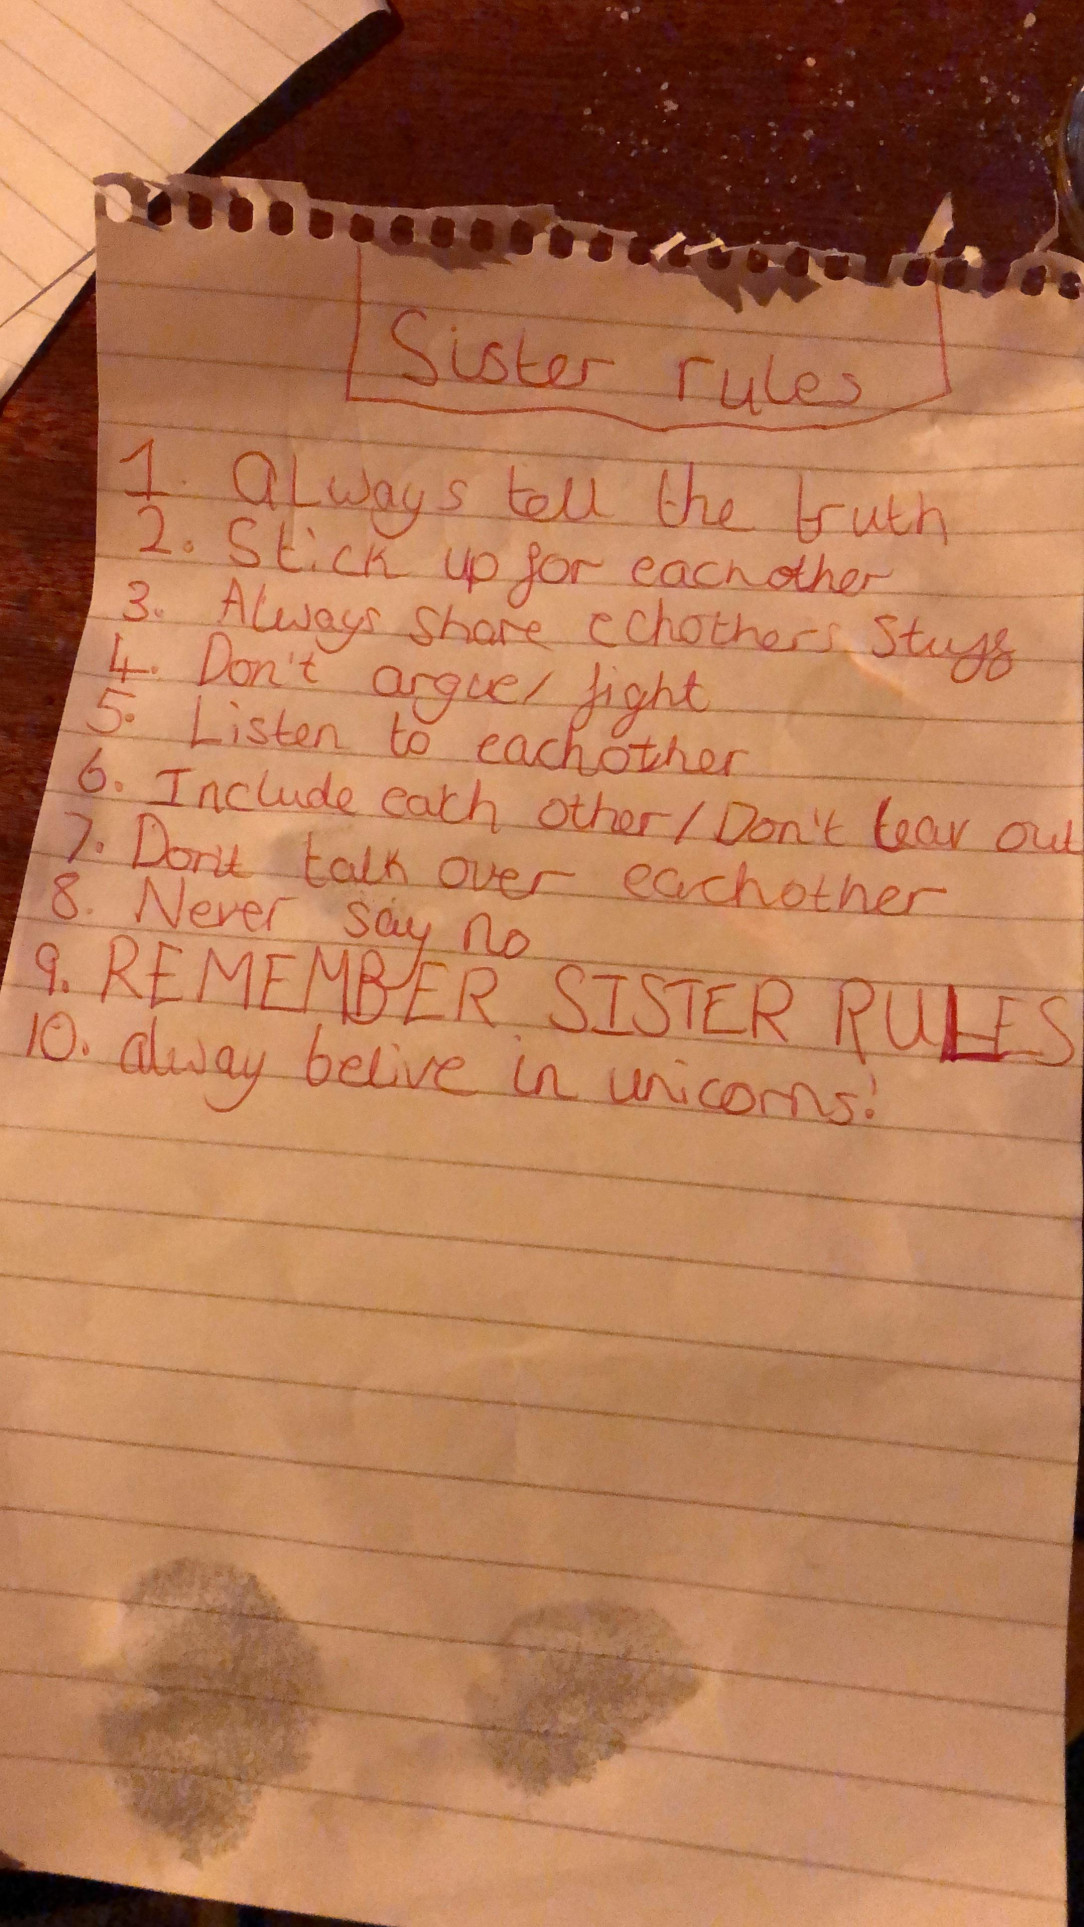 “Sister rules”